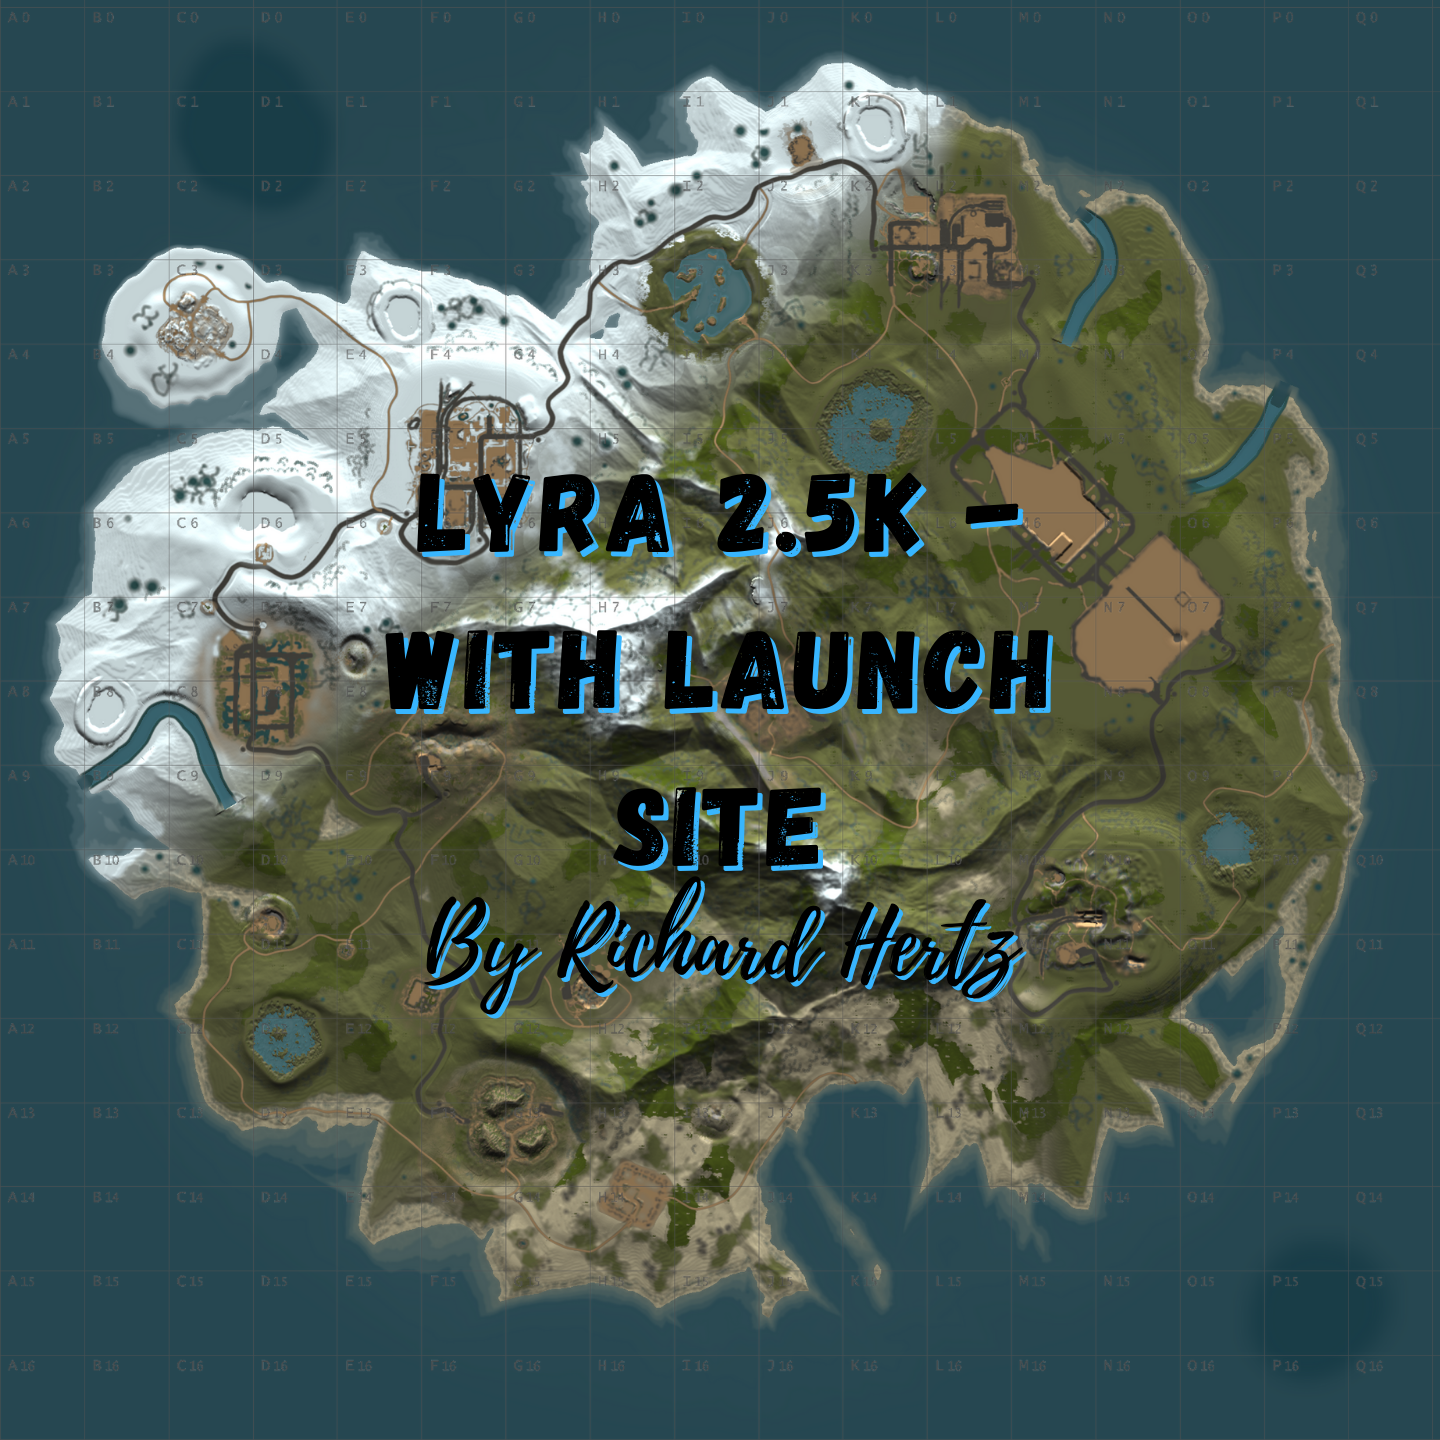 Lyra 2.5k - With Launch Site